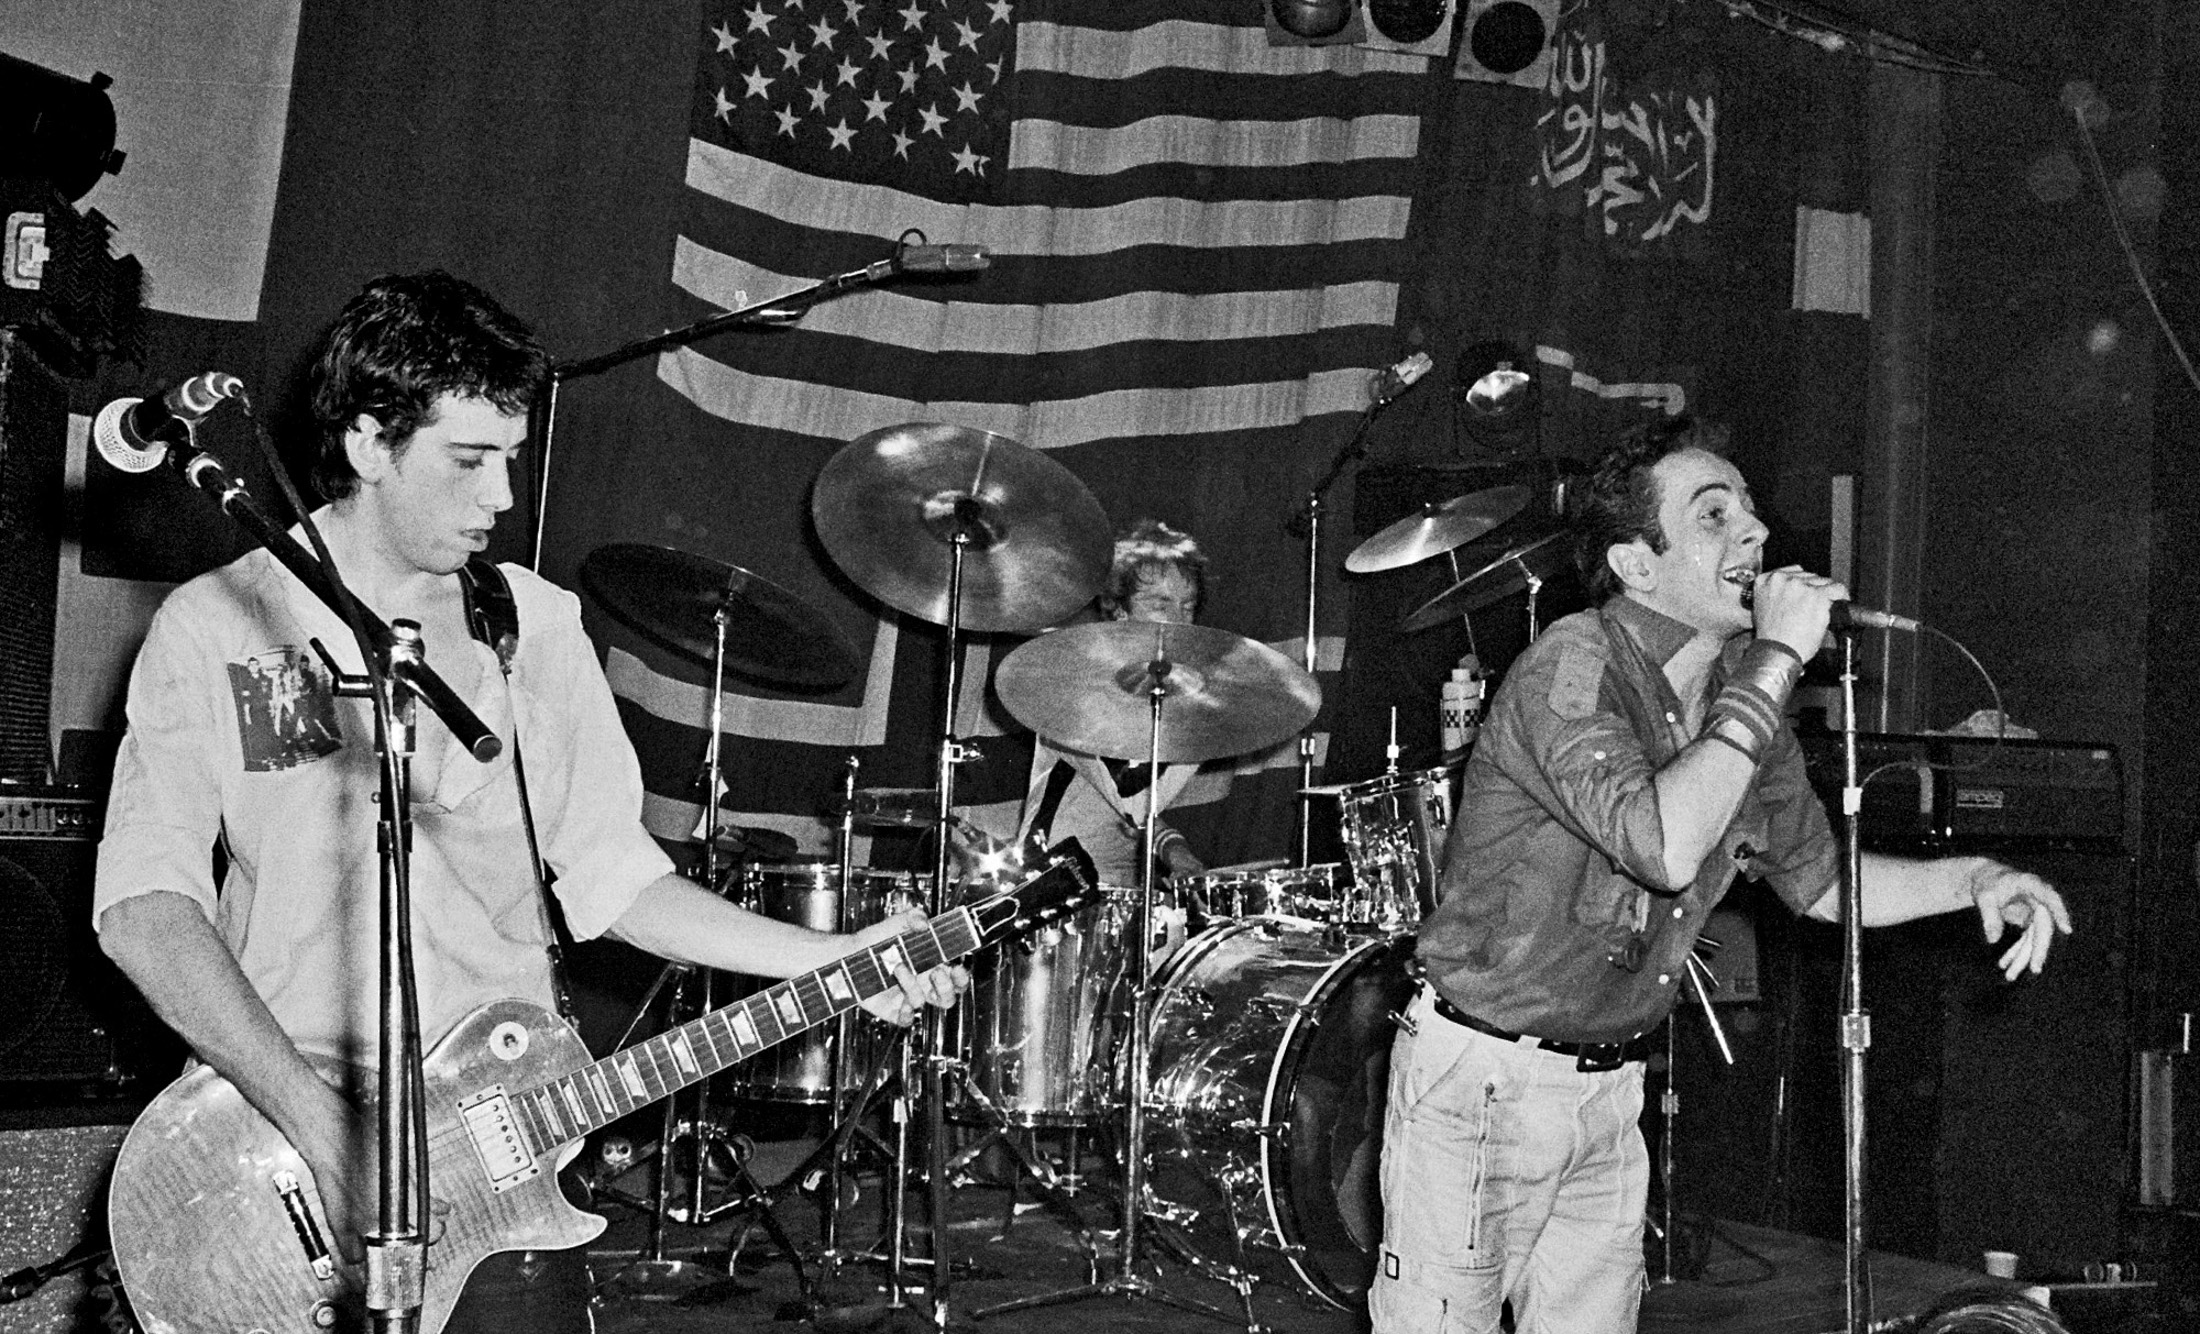 the clash on stage